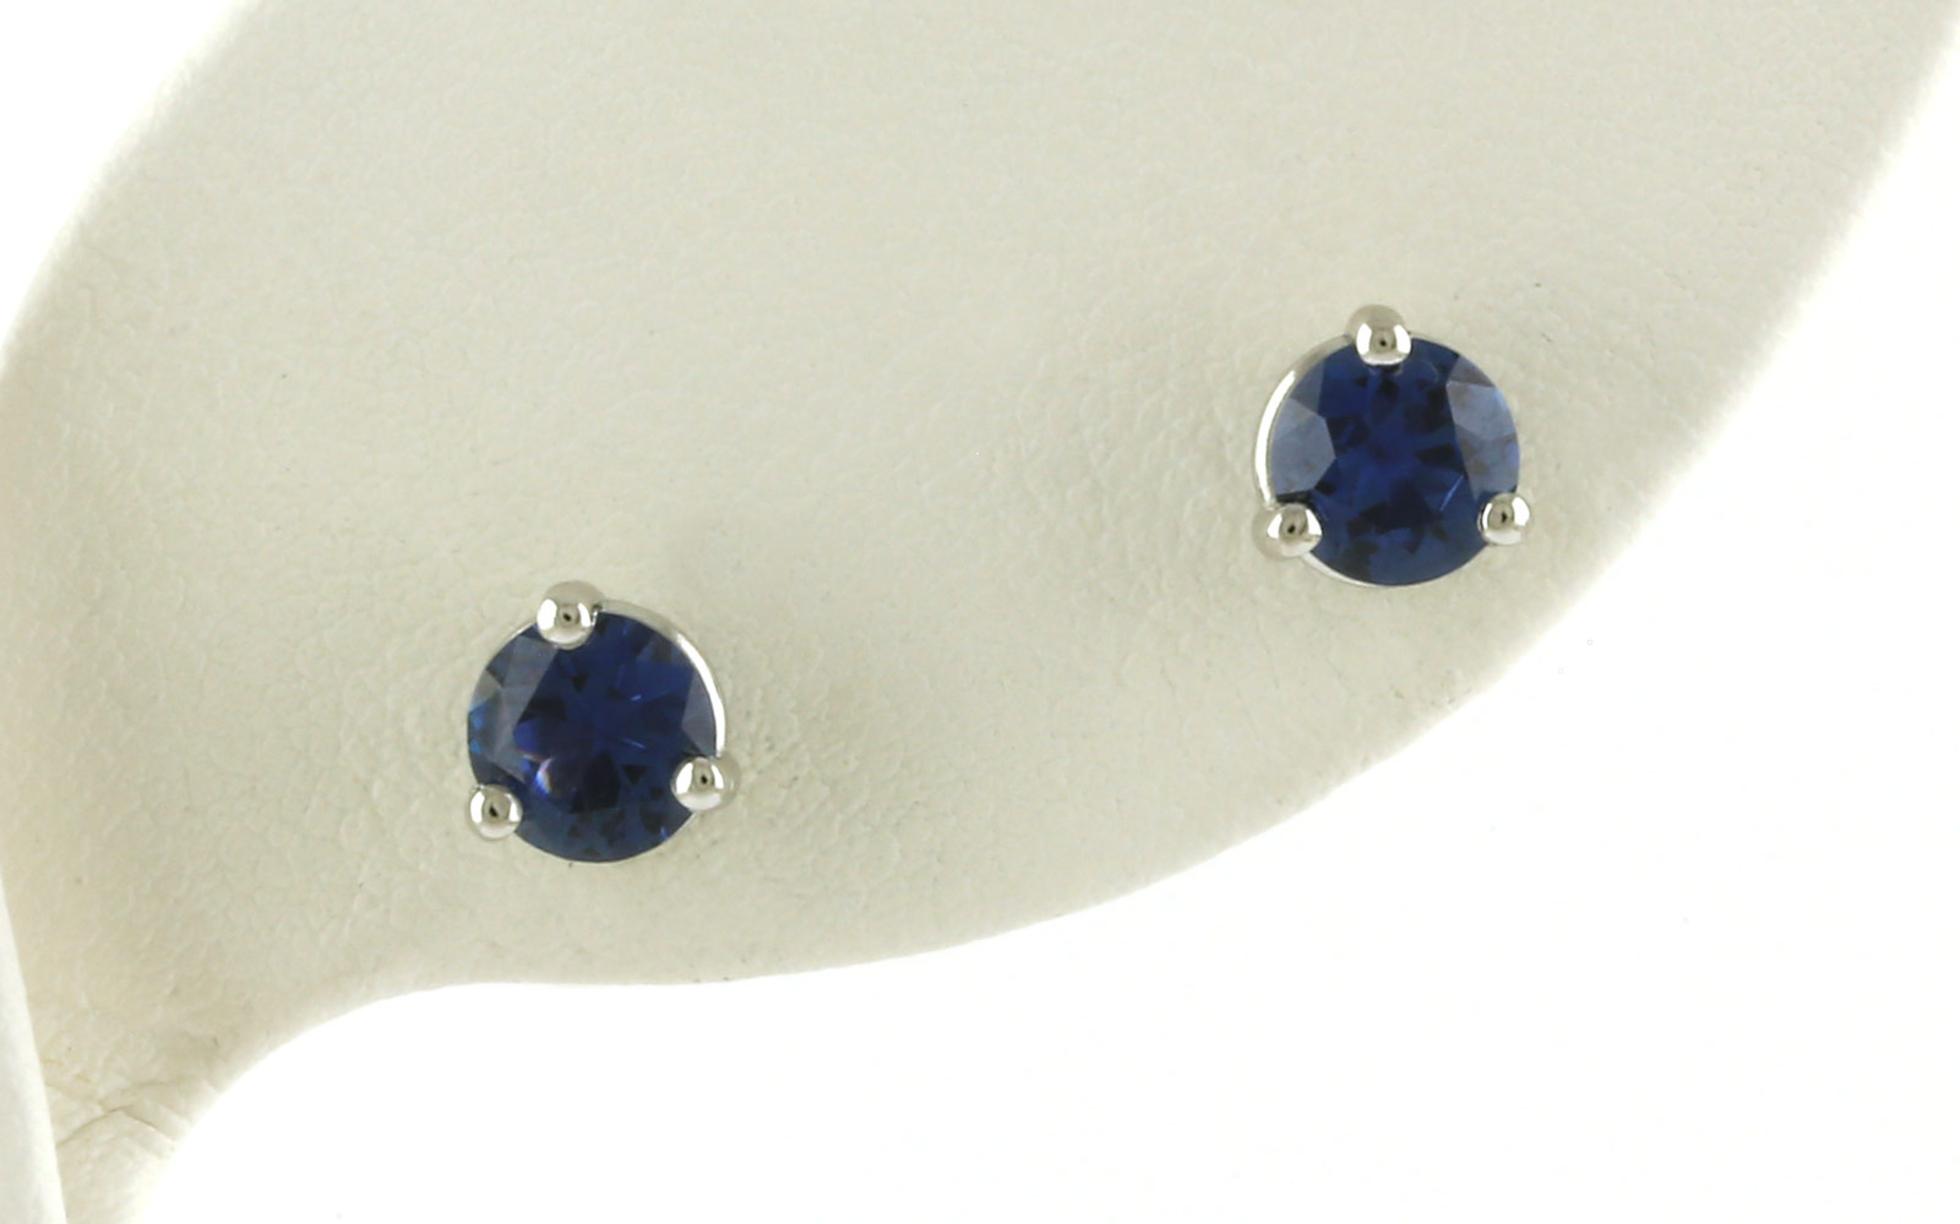 Montana Yogo Sapphire Stud Earrings in 3-Prong Martini Settings in White Gold (1.36cts TWT)